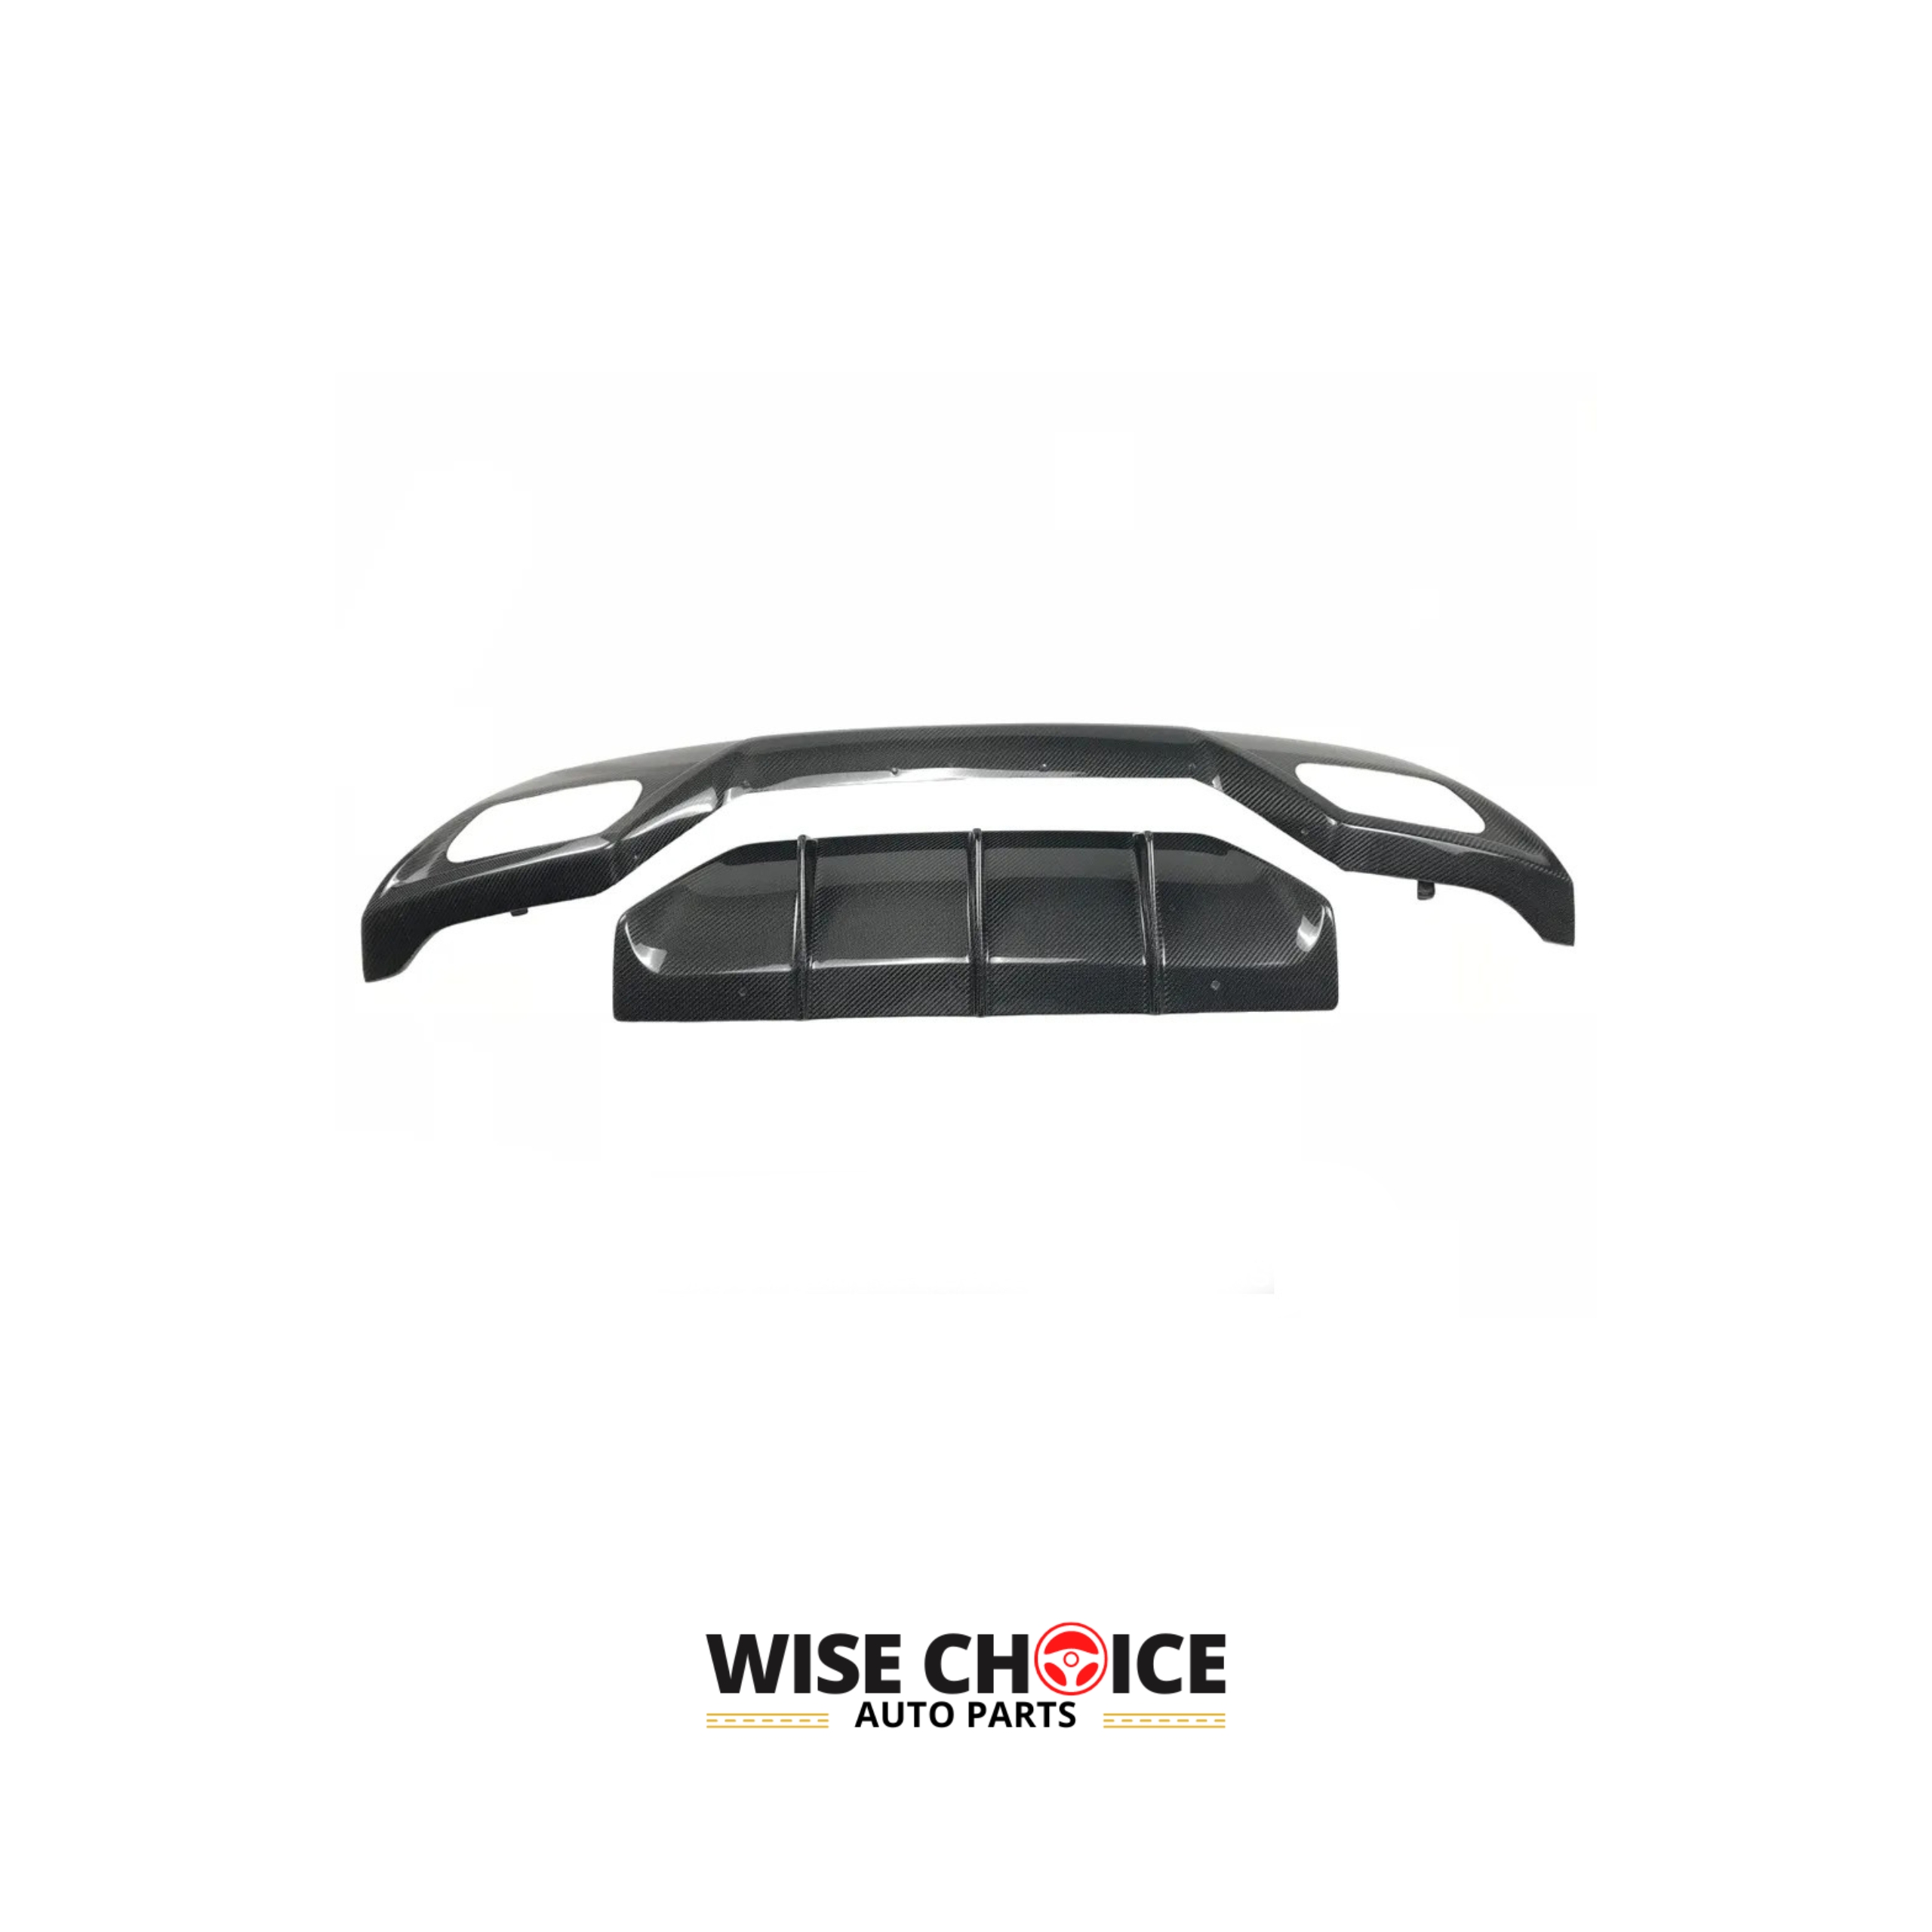 igh-quality Carbon Fiber Rear Diffuser fitted on 2012-2018 M-Benz A-Class (A200 A250 Sport / A45 AMG)